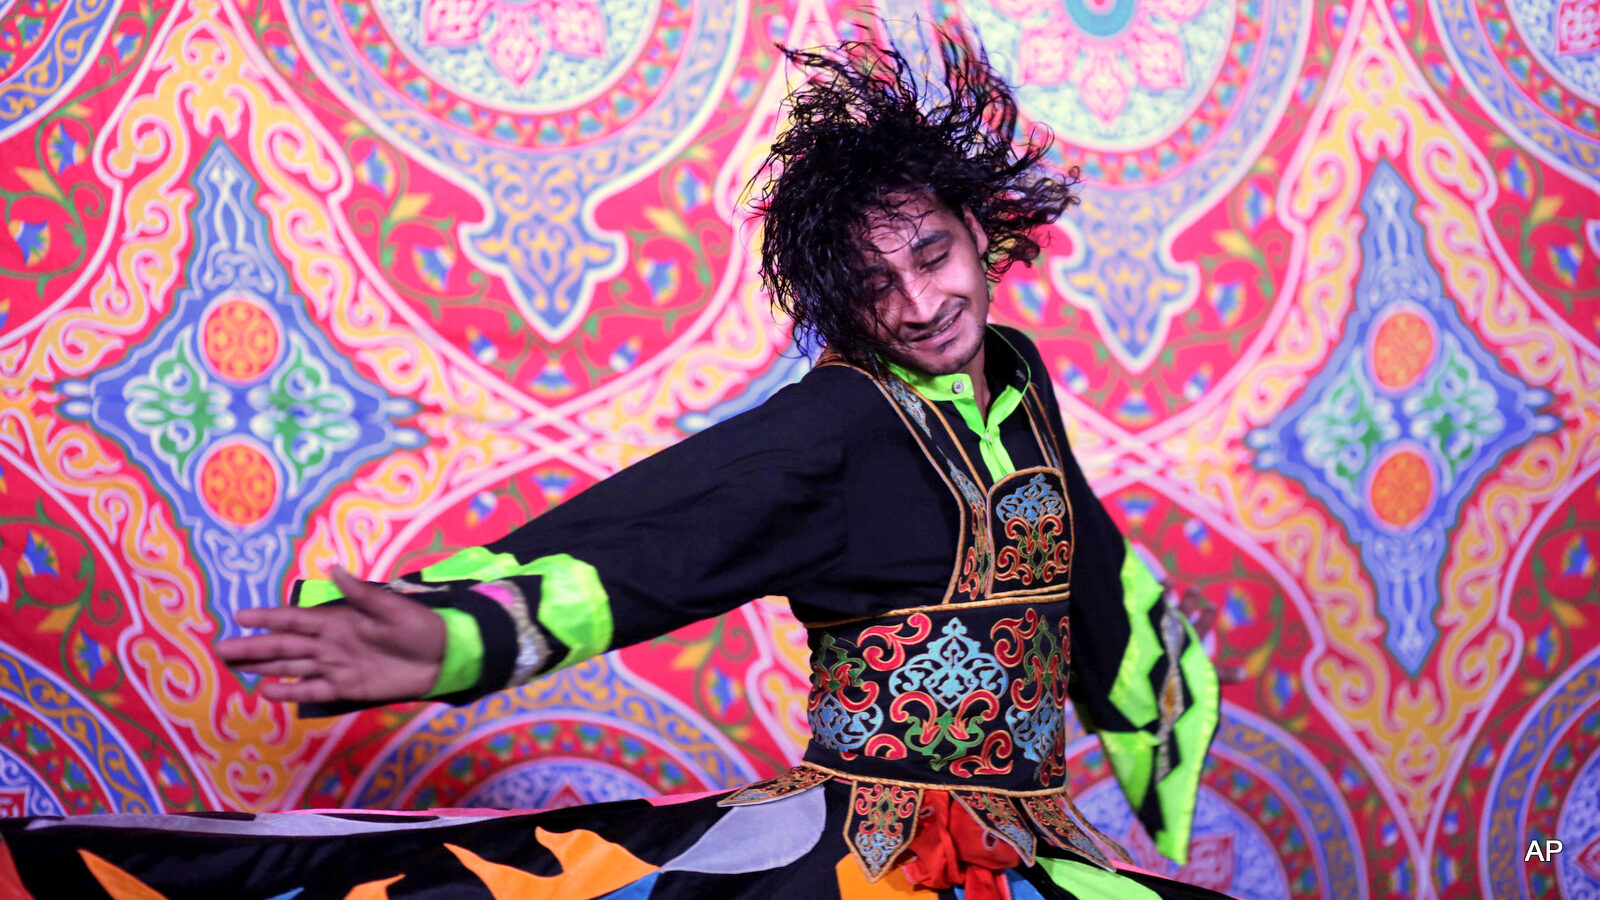 whirling dervish Mahmoud Rizk, spins during a performance held by the Al-Tannoura Egyptian Heritage Dance Troupe, at the Darb 1718 cultural center, in Cairo, Egypt.